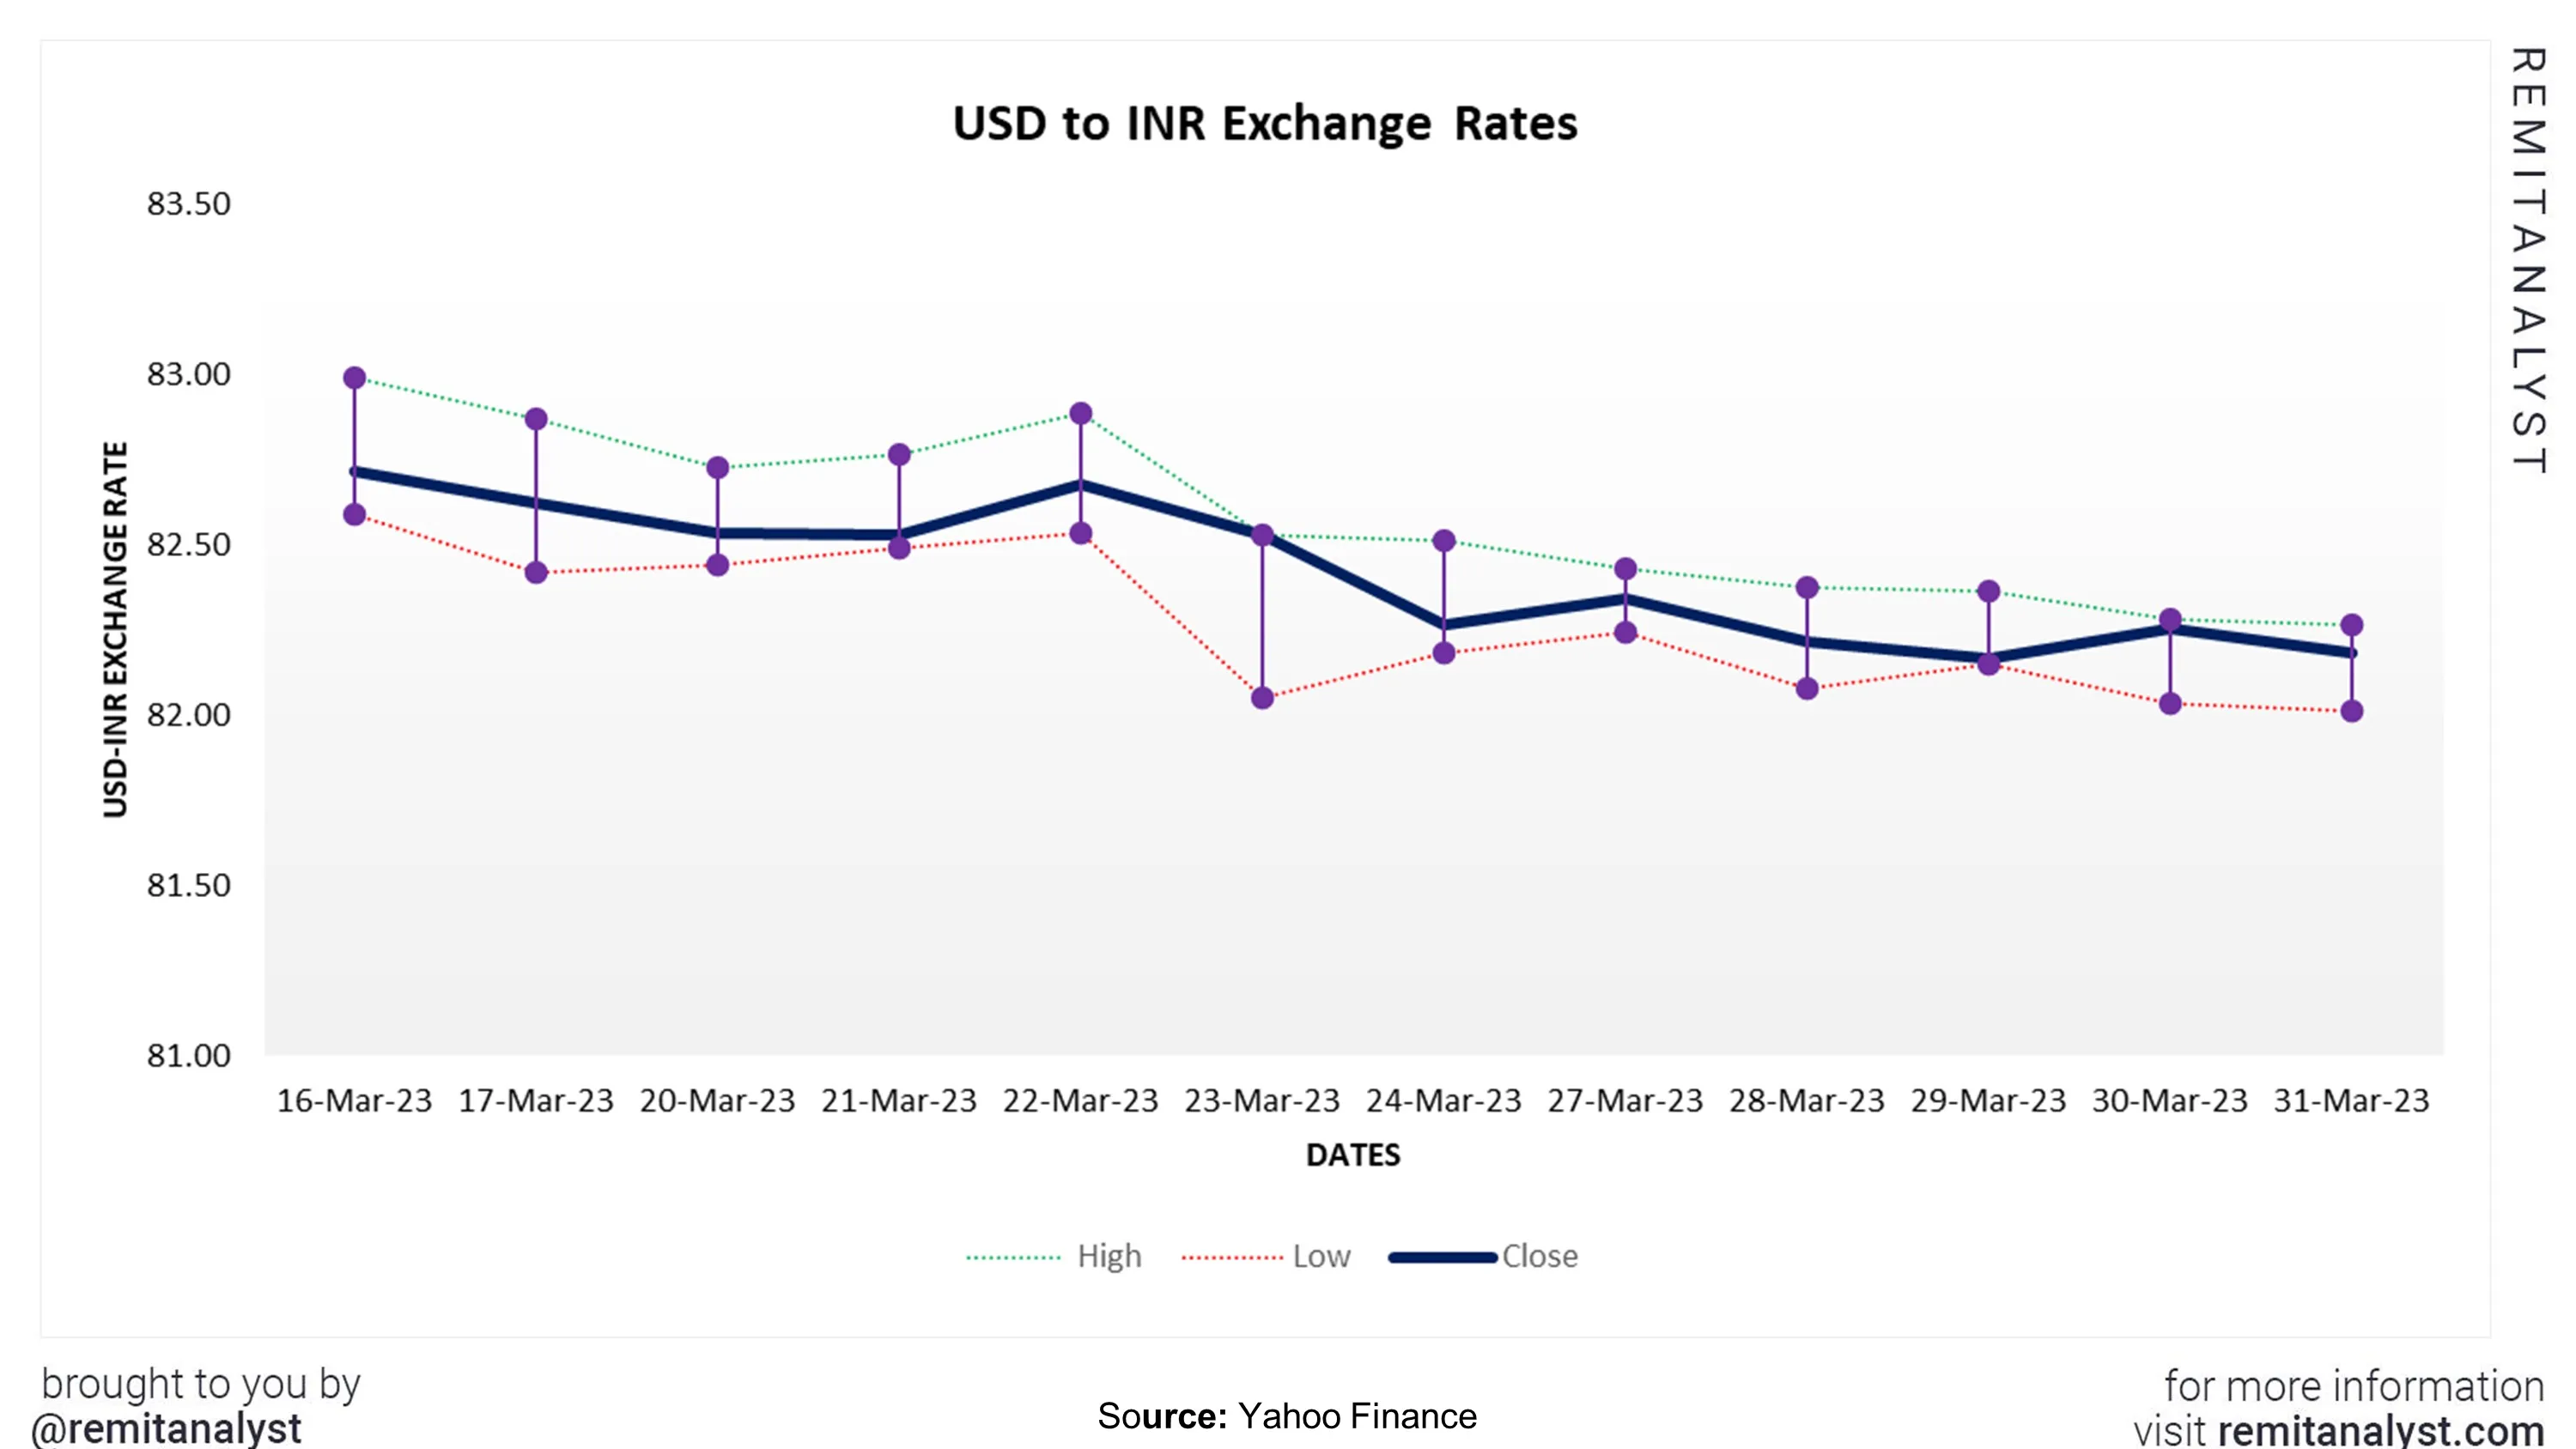 usd-to-inr-exchange-rate-from-16-mar-2023-to-31-mar-2023